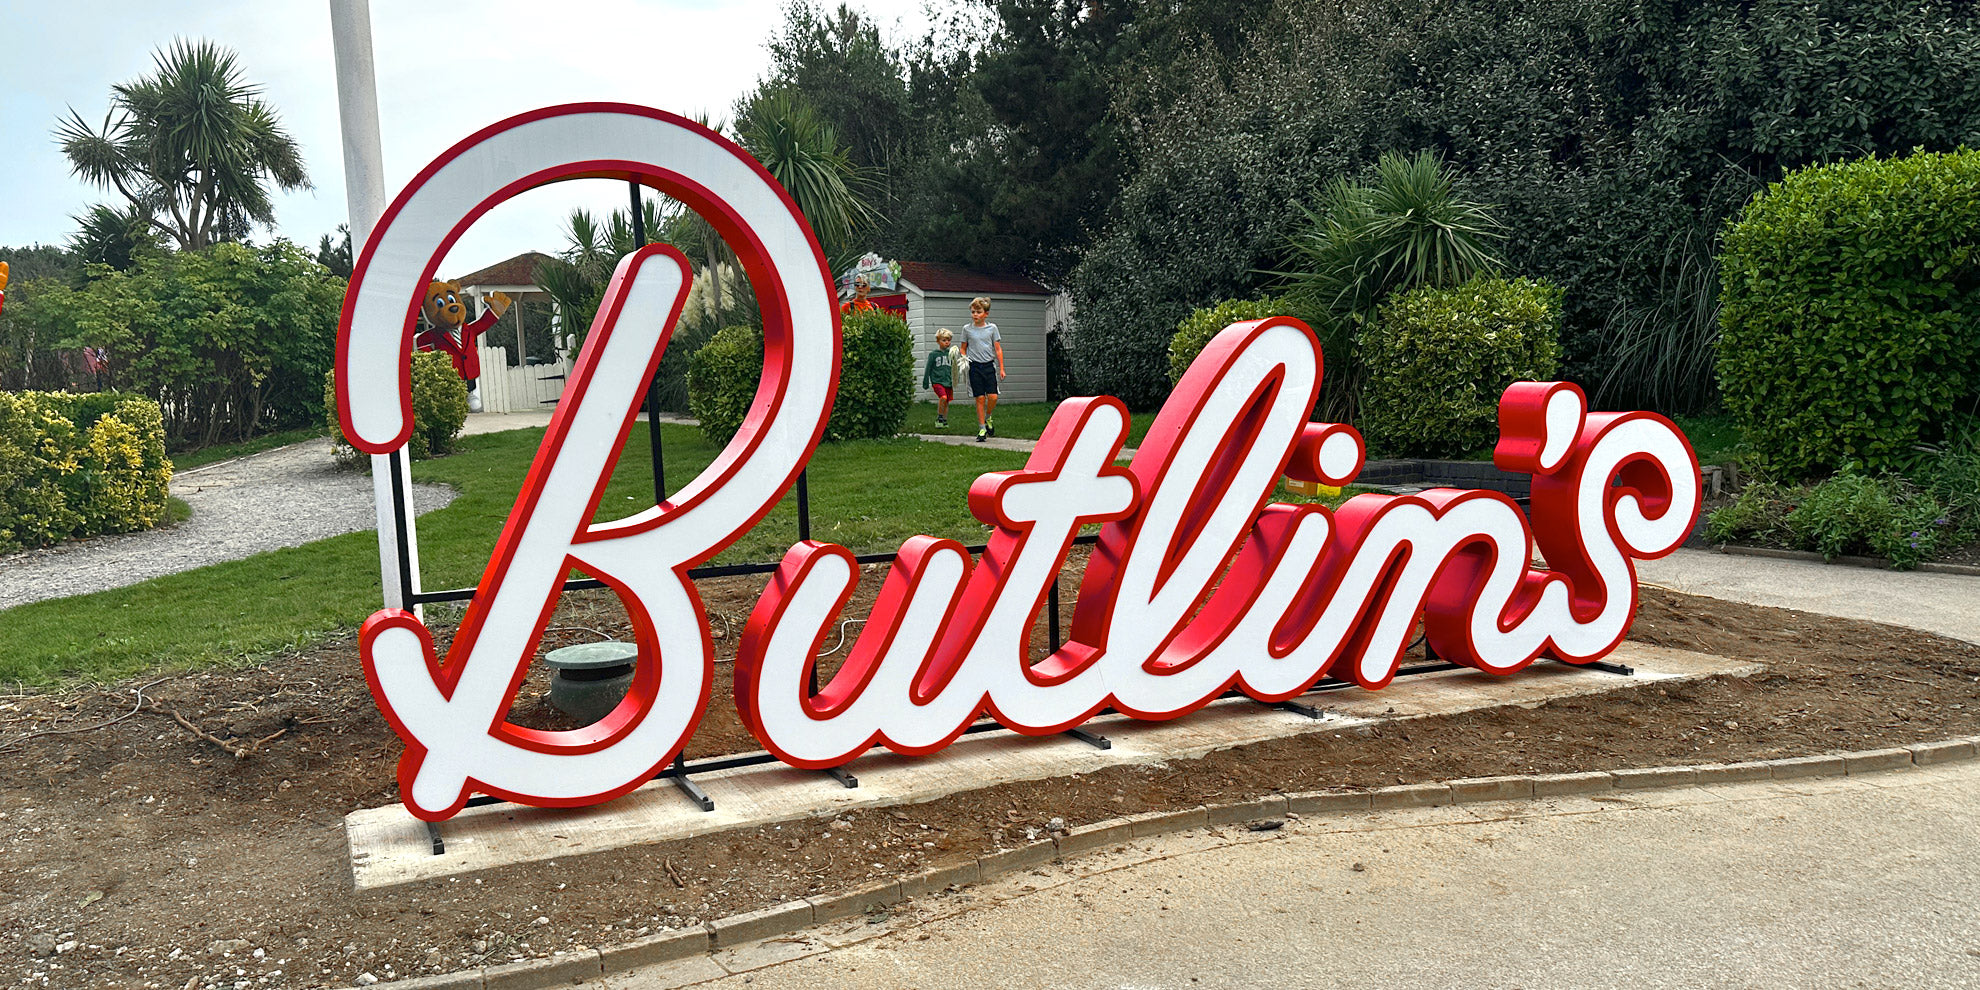 Butlins Giant Illuminated Letters